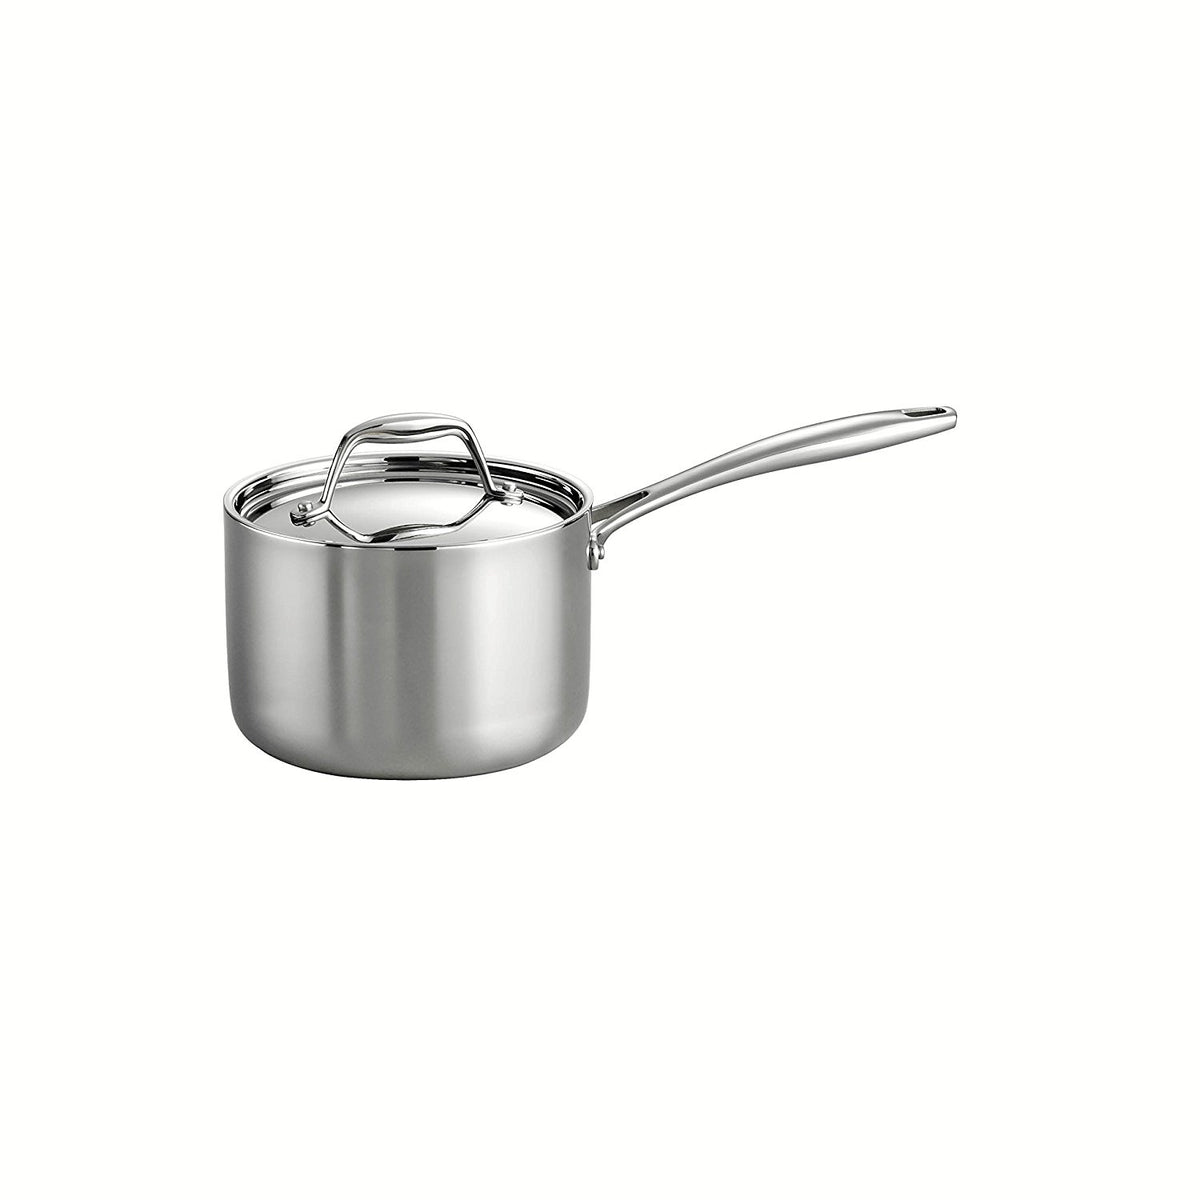 Tramontina 80116/022DS 2QT Gourmet Tri-Ply Clad Covered Sauce Pan, Stainless Steel - Induction Ready, Dishwasher Safe, Oven Safe COOKPOT